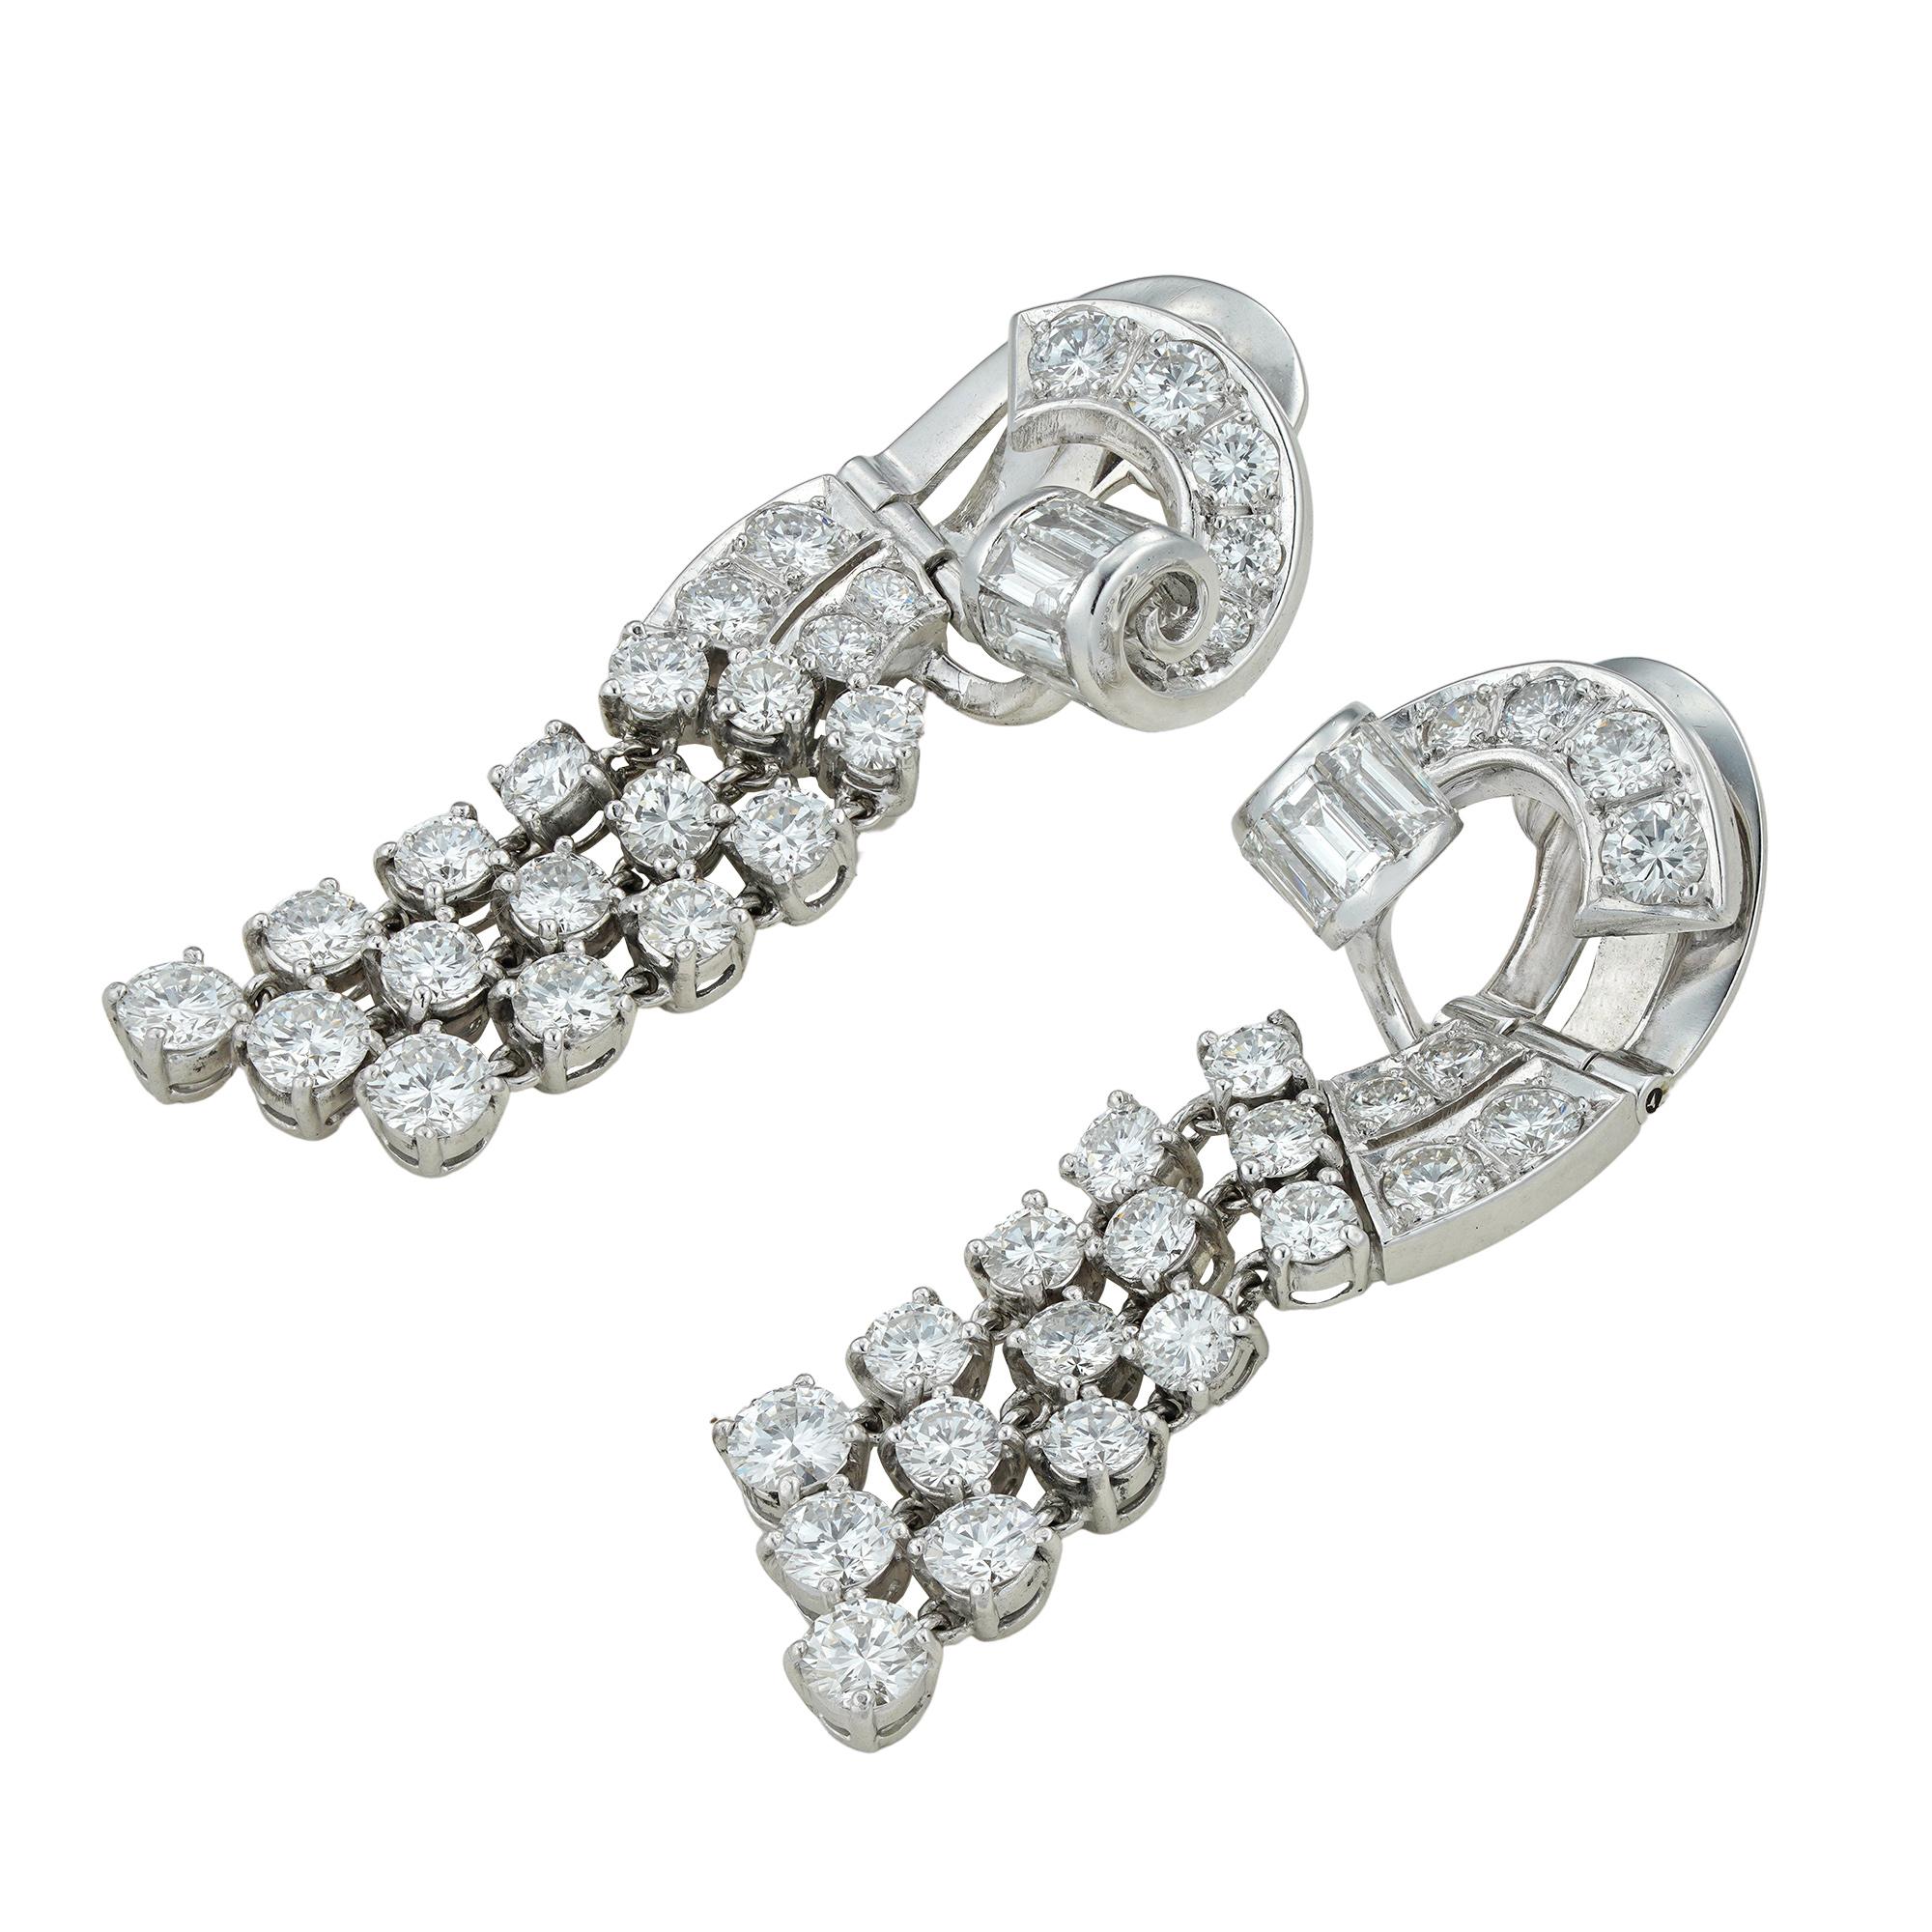 A pair of vintage diamond drop earring, each earring consisting of three graduated articulated tassel drops, claw-set with fifteen round brilliant-cut diamonds, suspended from a scrolled style top, grain-set with ten graduated round brilliant- and